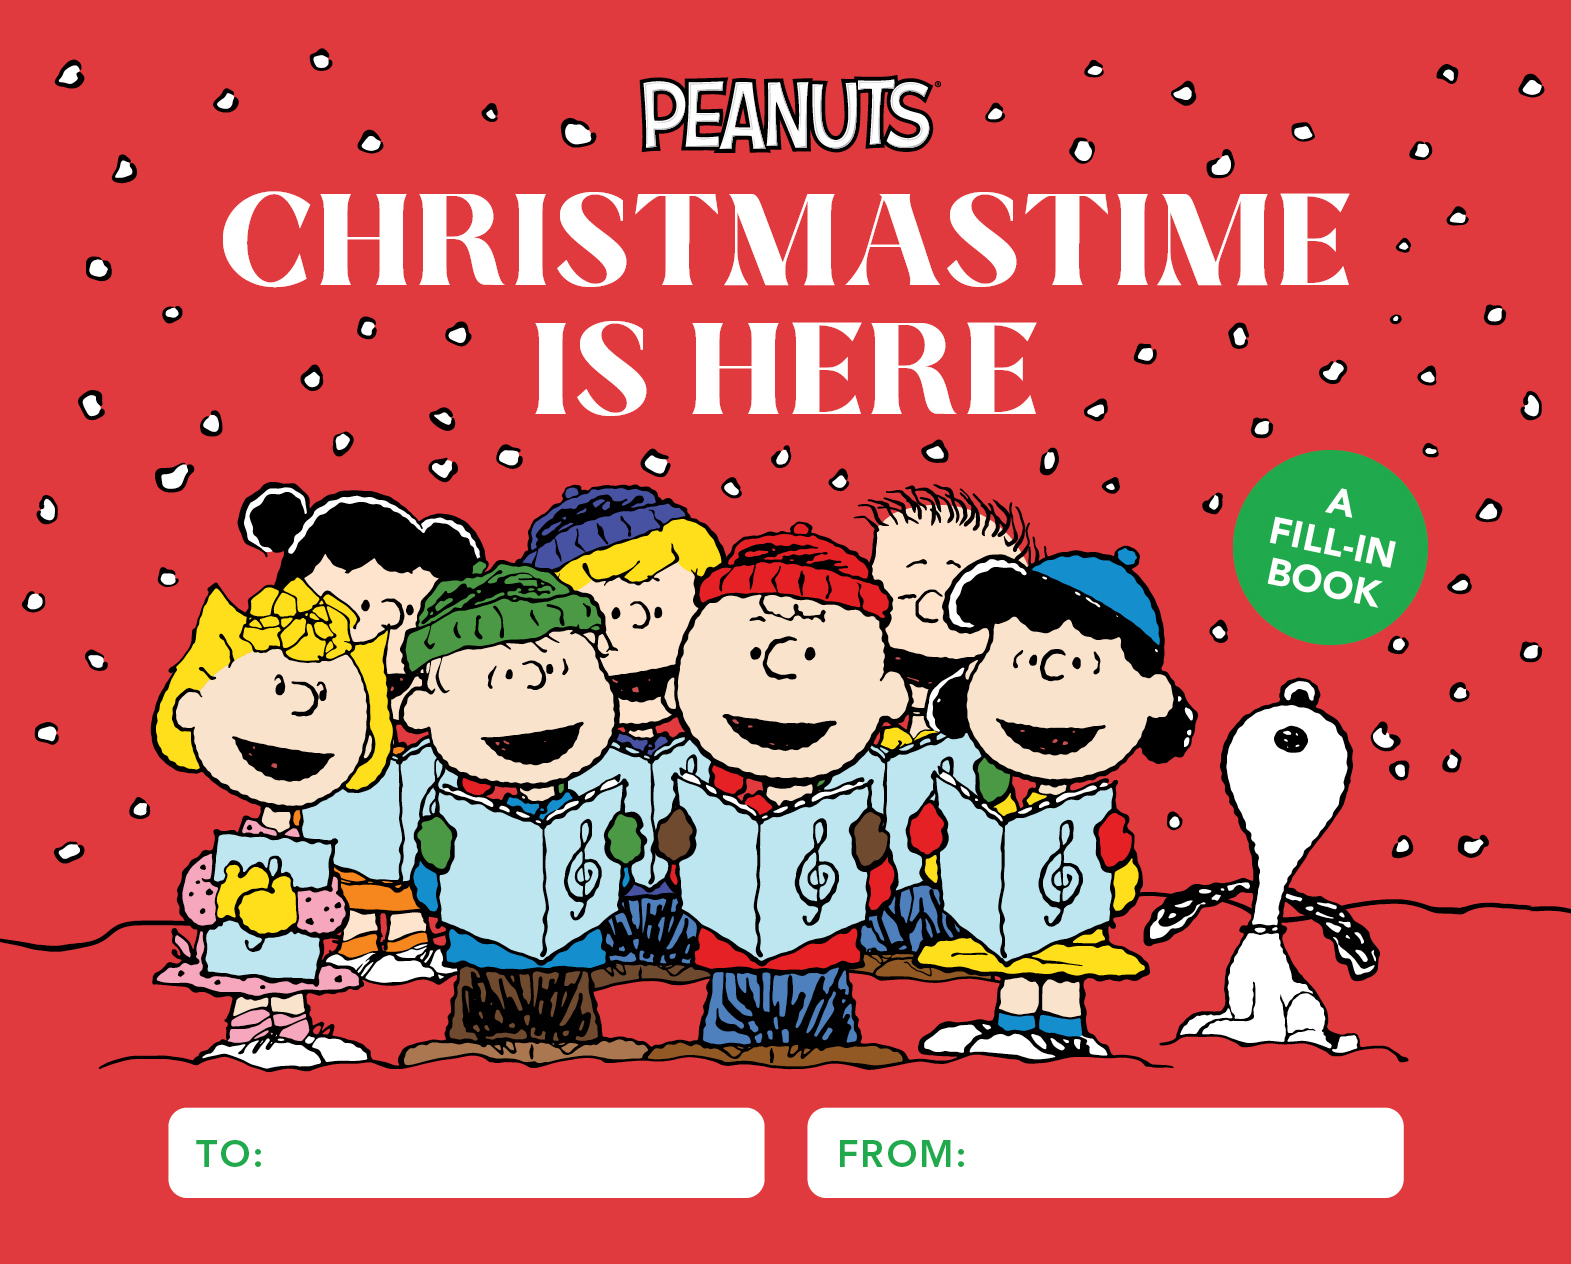 Peanuts: The Gang's All Here!  Book by Charles M. Schulz